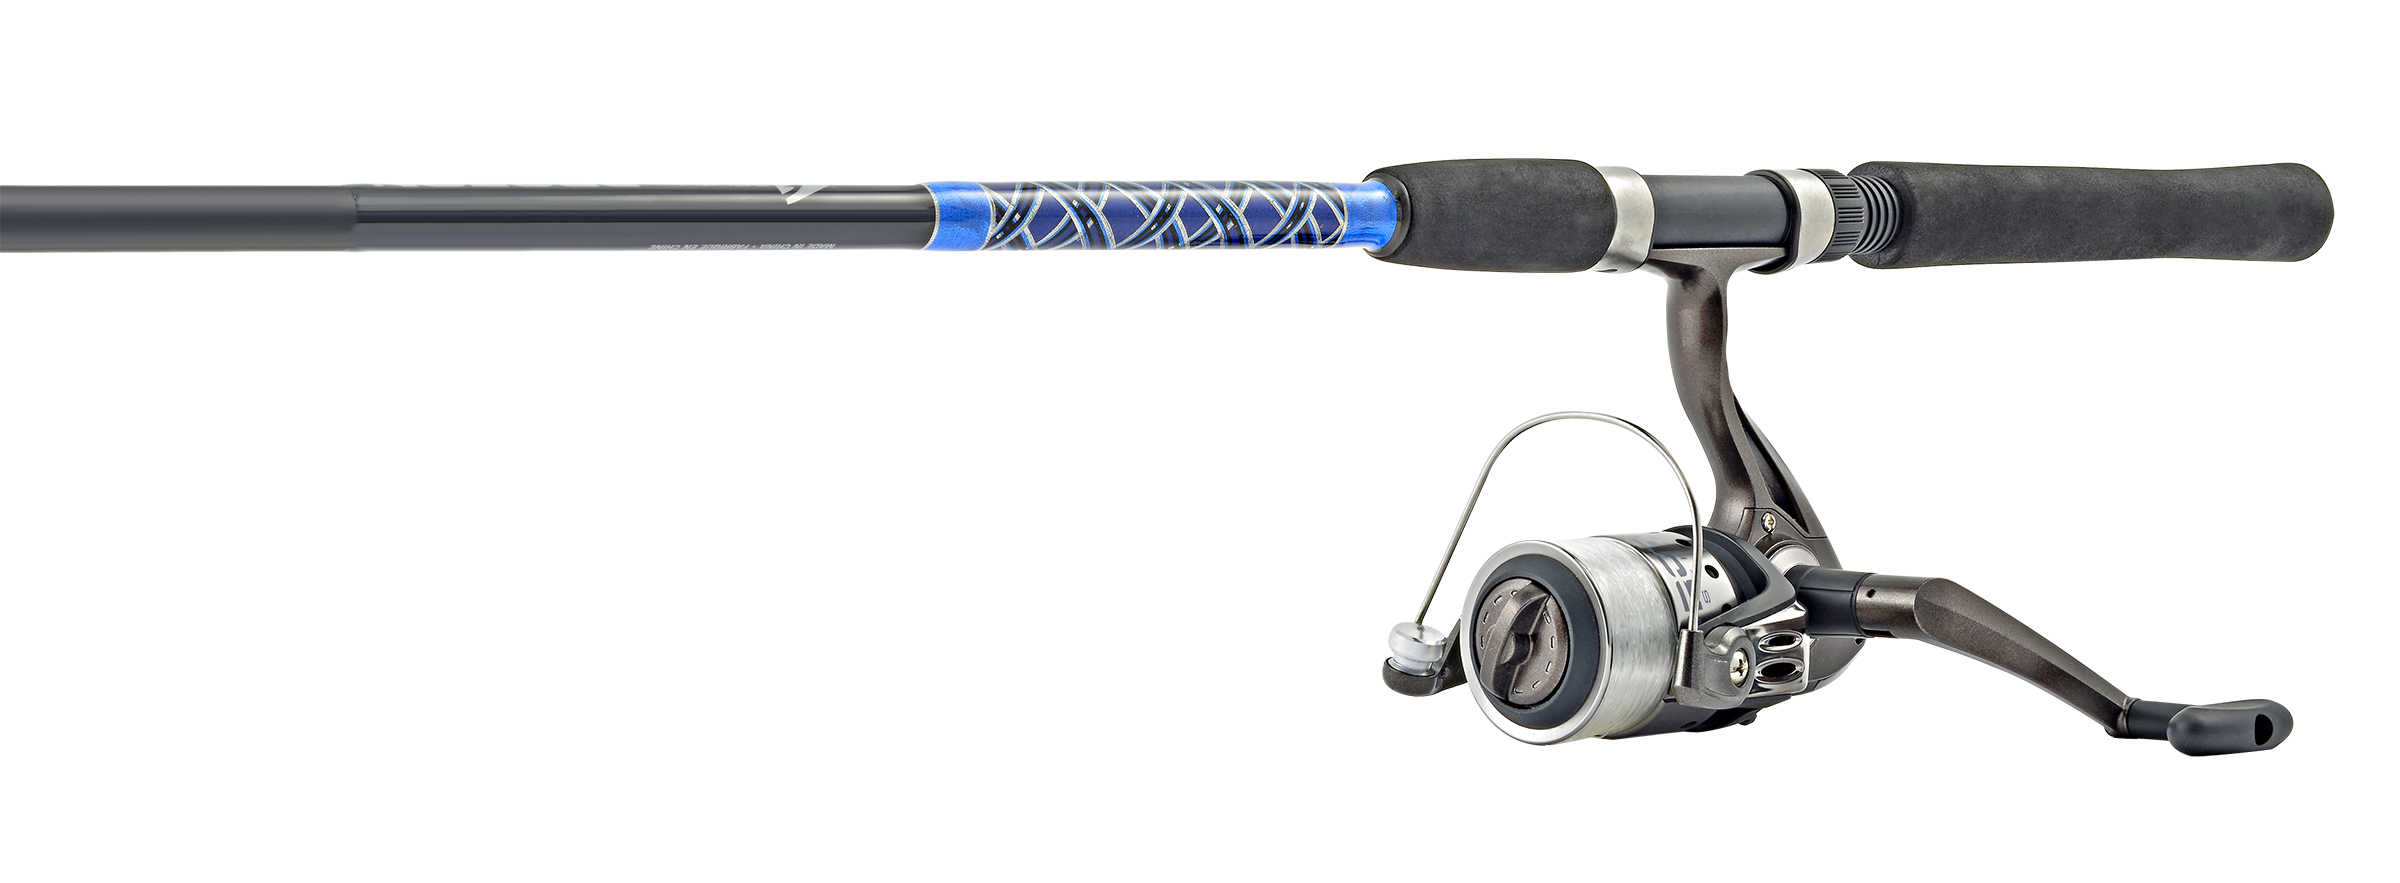 South Bend Proton Spinning Rod and Reel Combo - 6' SBP230/602MS